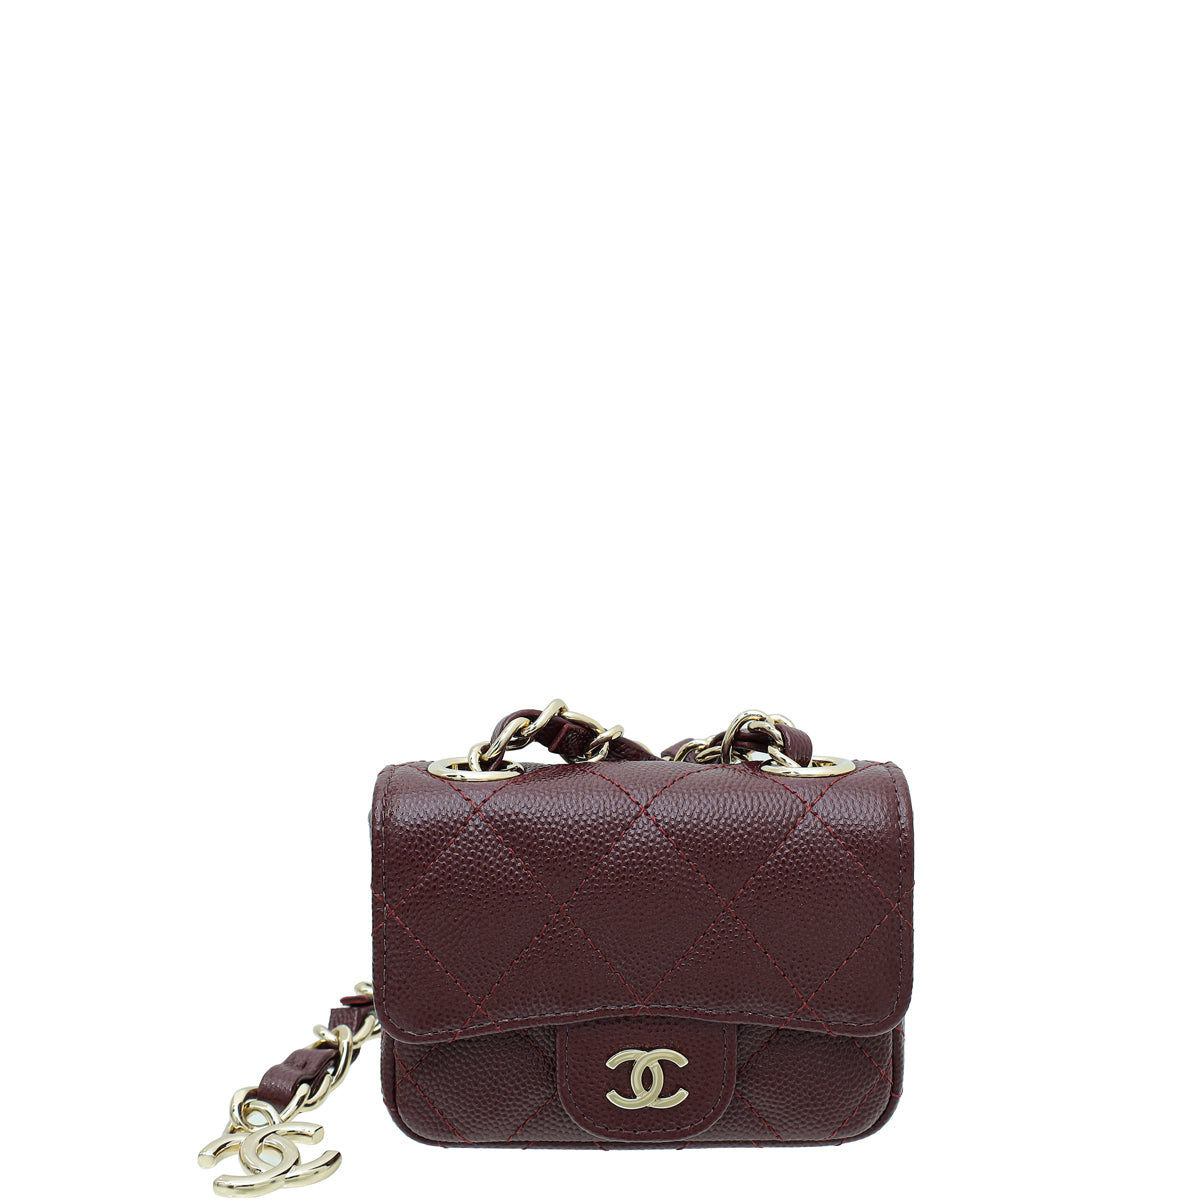 Chanel Timeless Classic 255 Jumbo Double Flap Bag in Burgundy Caviar with  Silver Hardware  SOLD